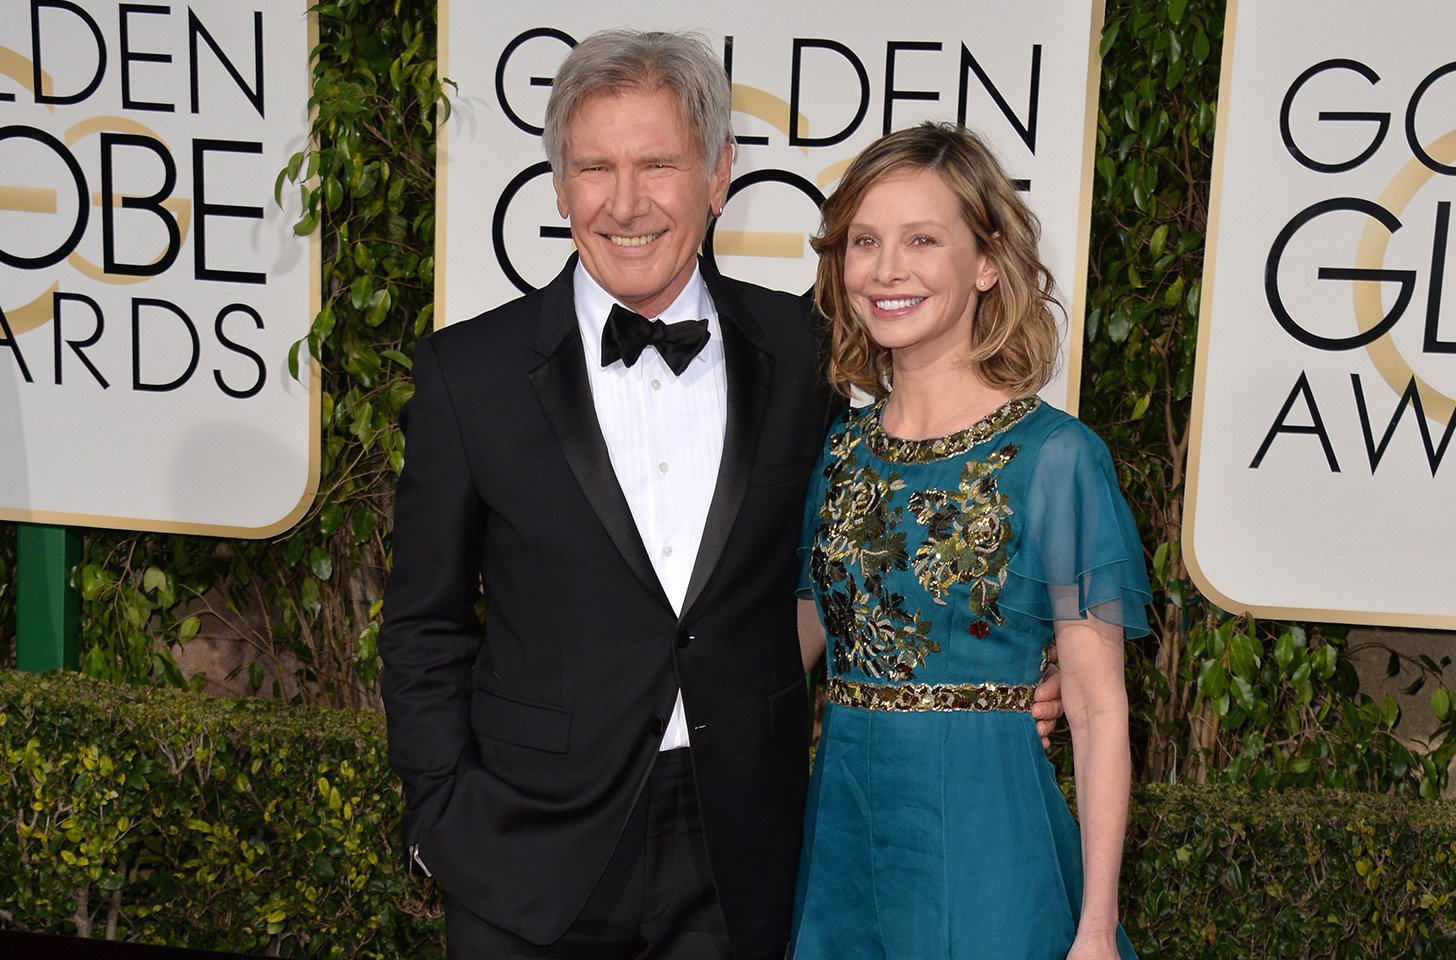 Reports Claim Harrison Ford’s Marriage To Calista Flockhart Is On The Rocks